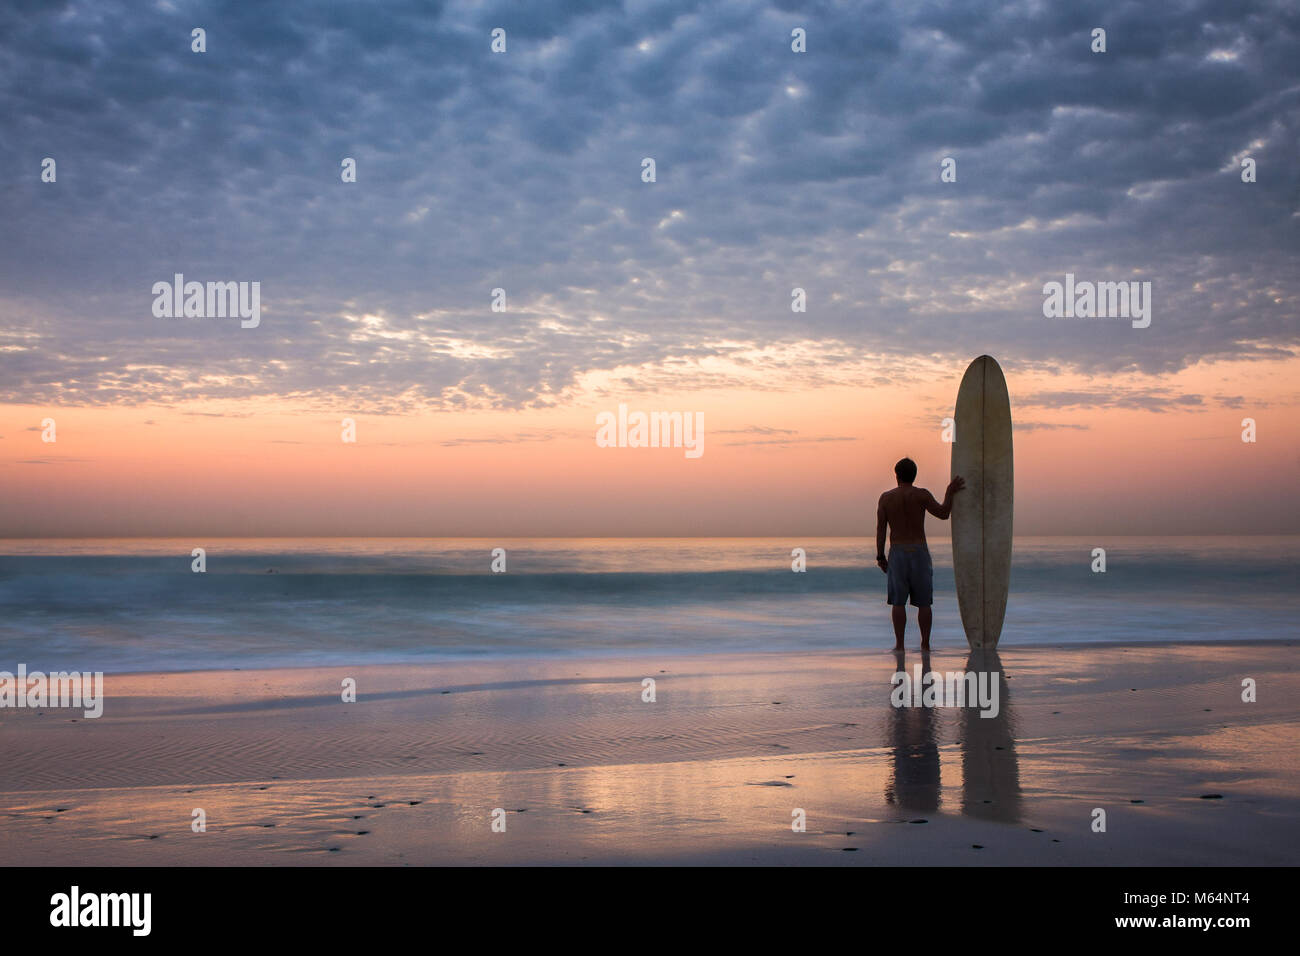 surfer with longboard standing on beach at sunset watching waves Stock Photo